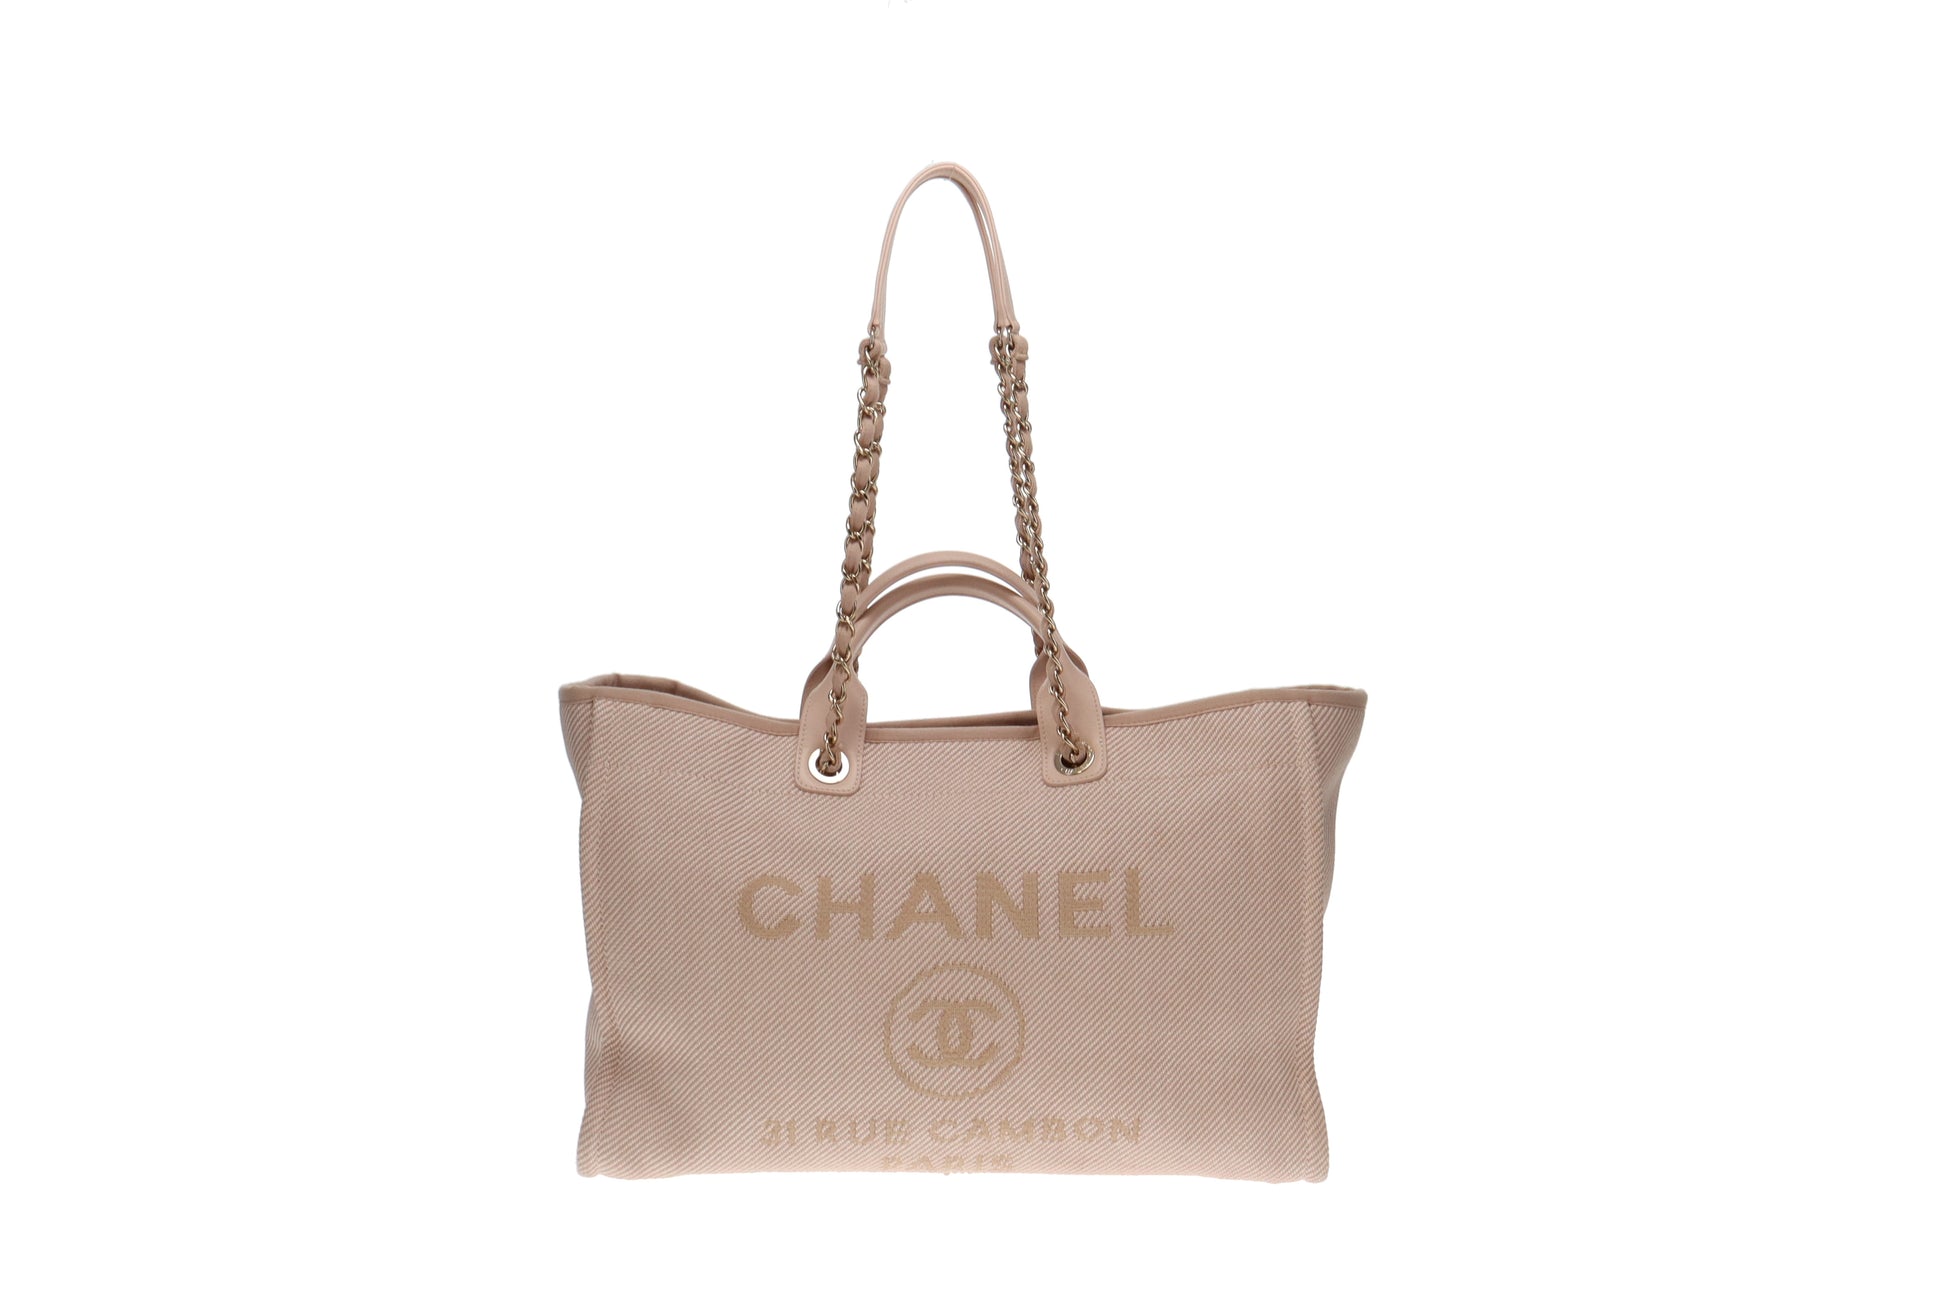 Chanel Canvas Deauville Large Tote Bags